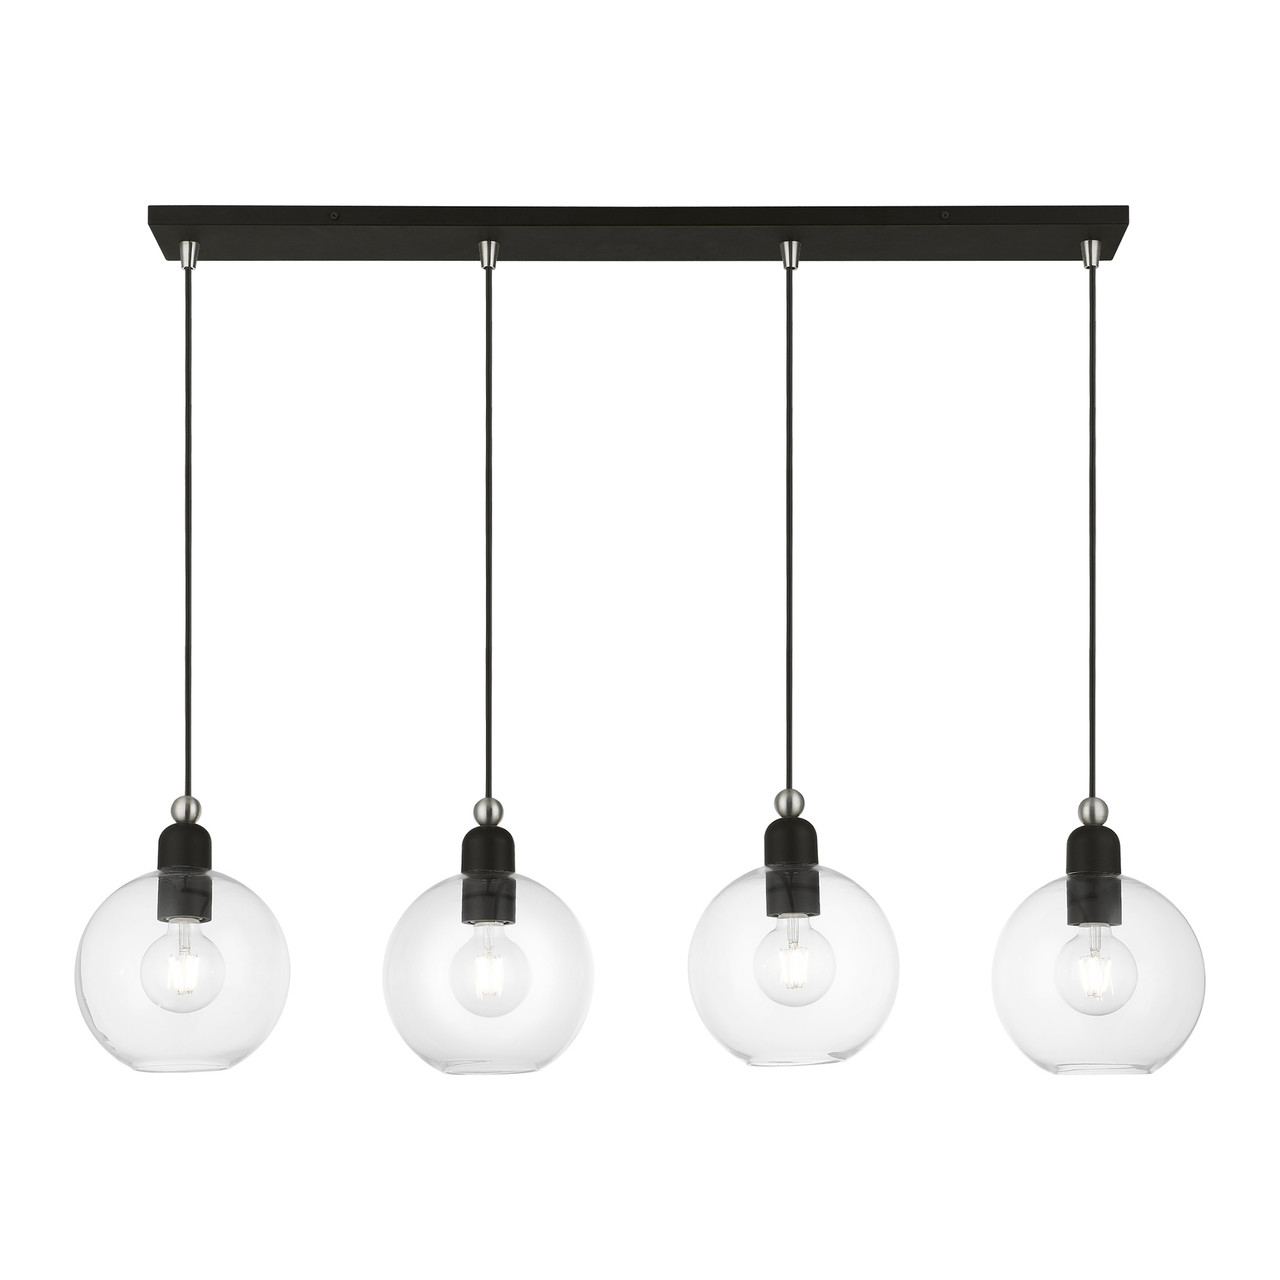 LIVEX LIGHTING 48976-04 4 Light Black with Brushed Nickel Accents Sphere Linear Chandelier